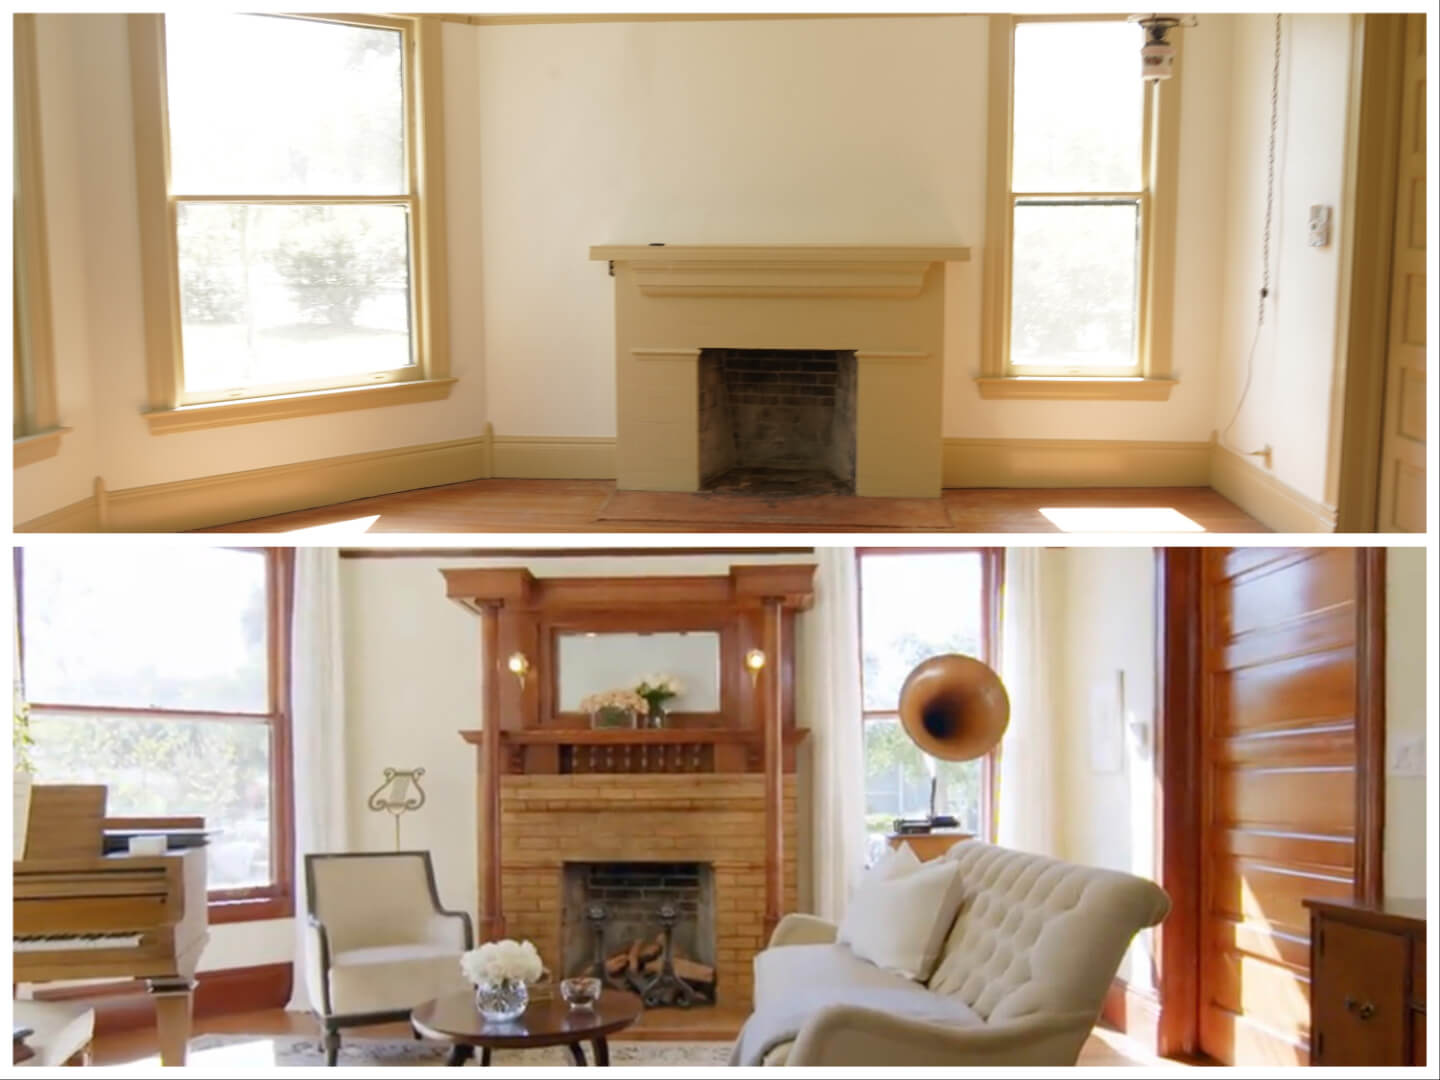 Before and after photos of a living room restoration on Magnolia Network's 'Restored'